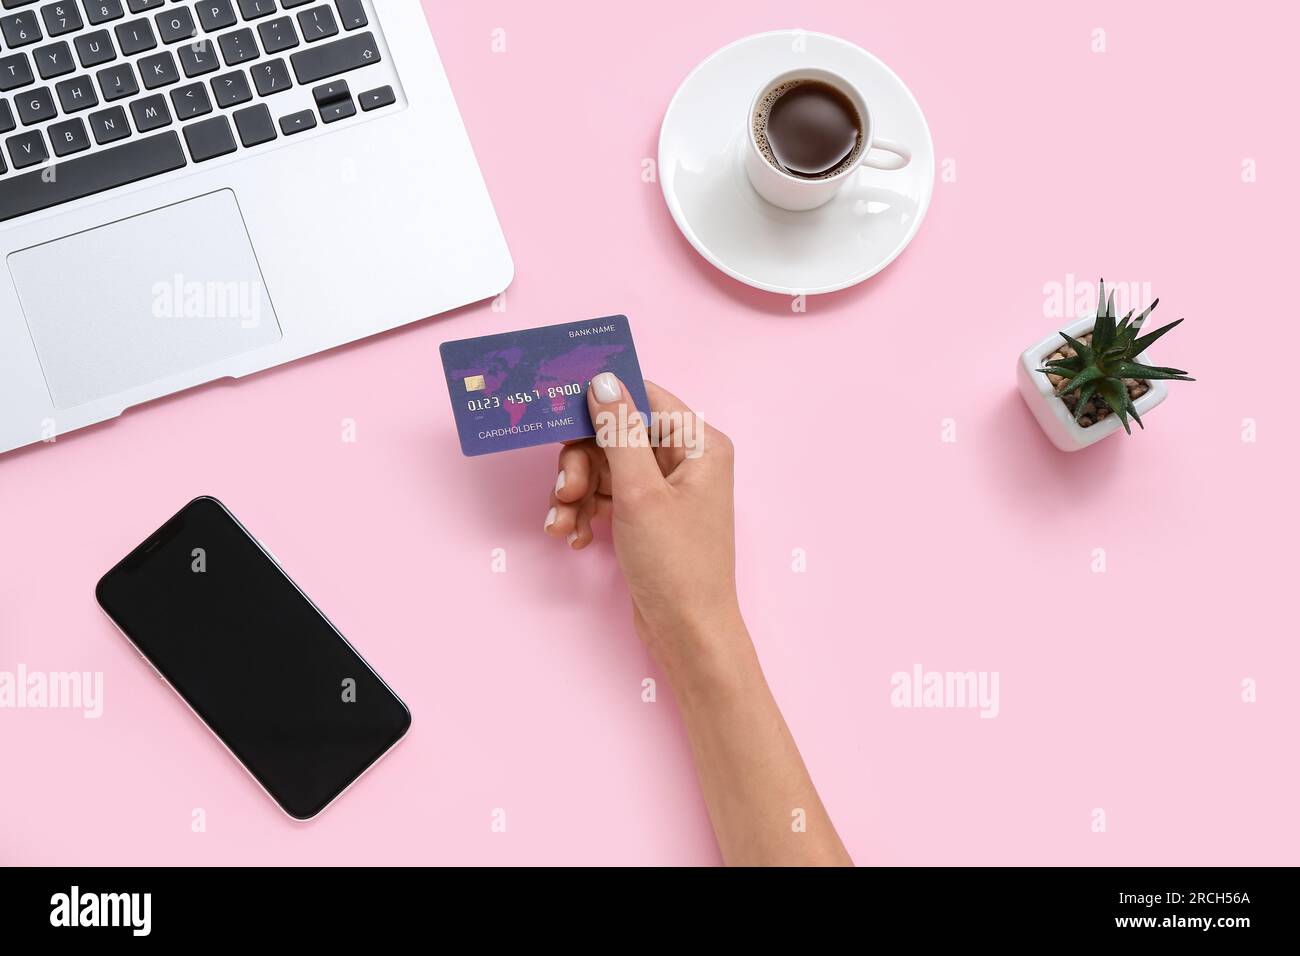 Female hand with credit card, cup of coffee and mobile phone on pink background Stock Photo